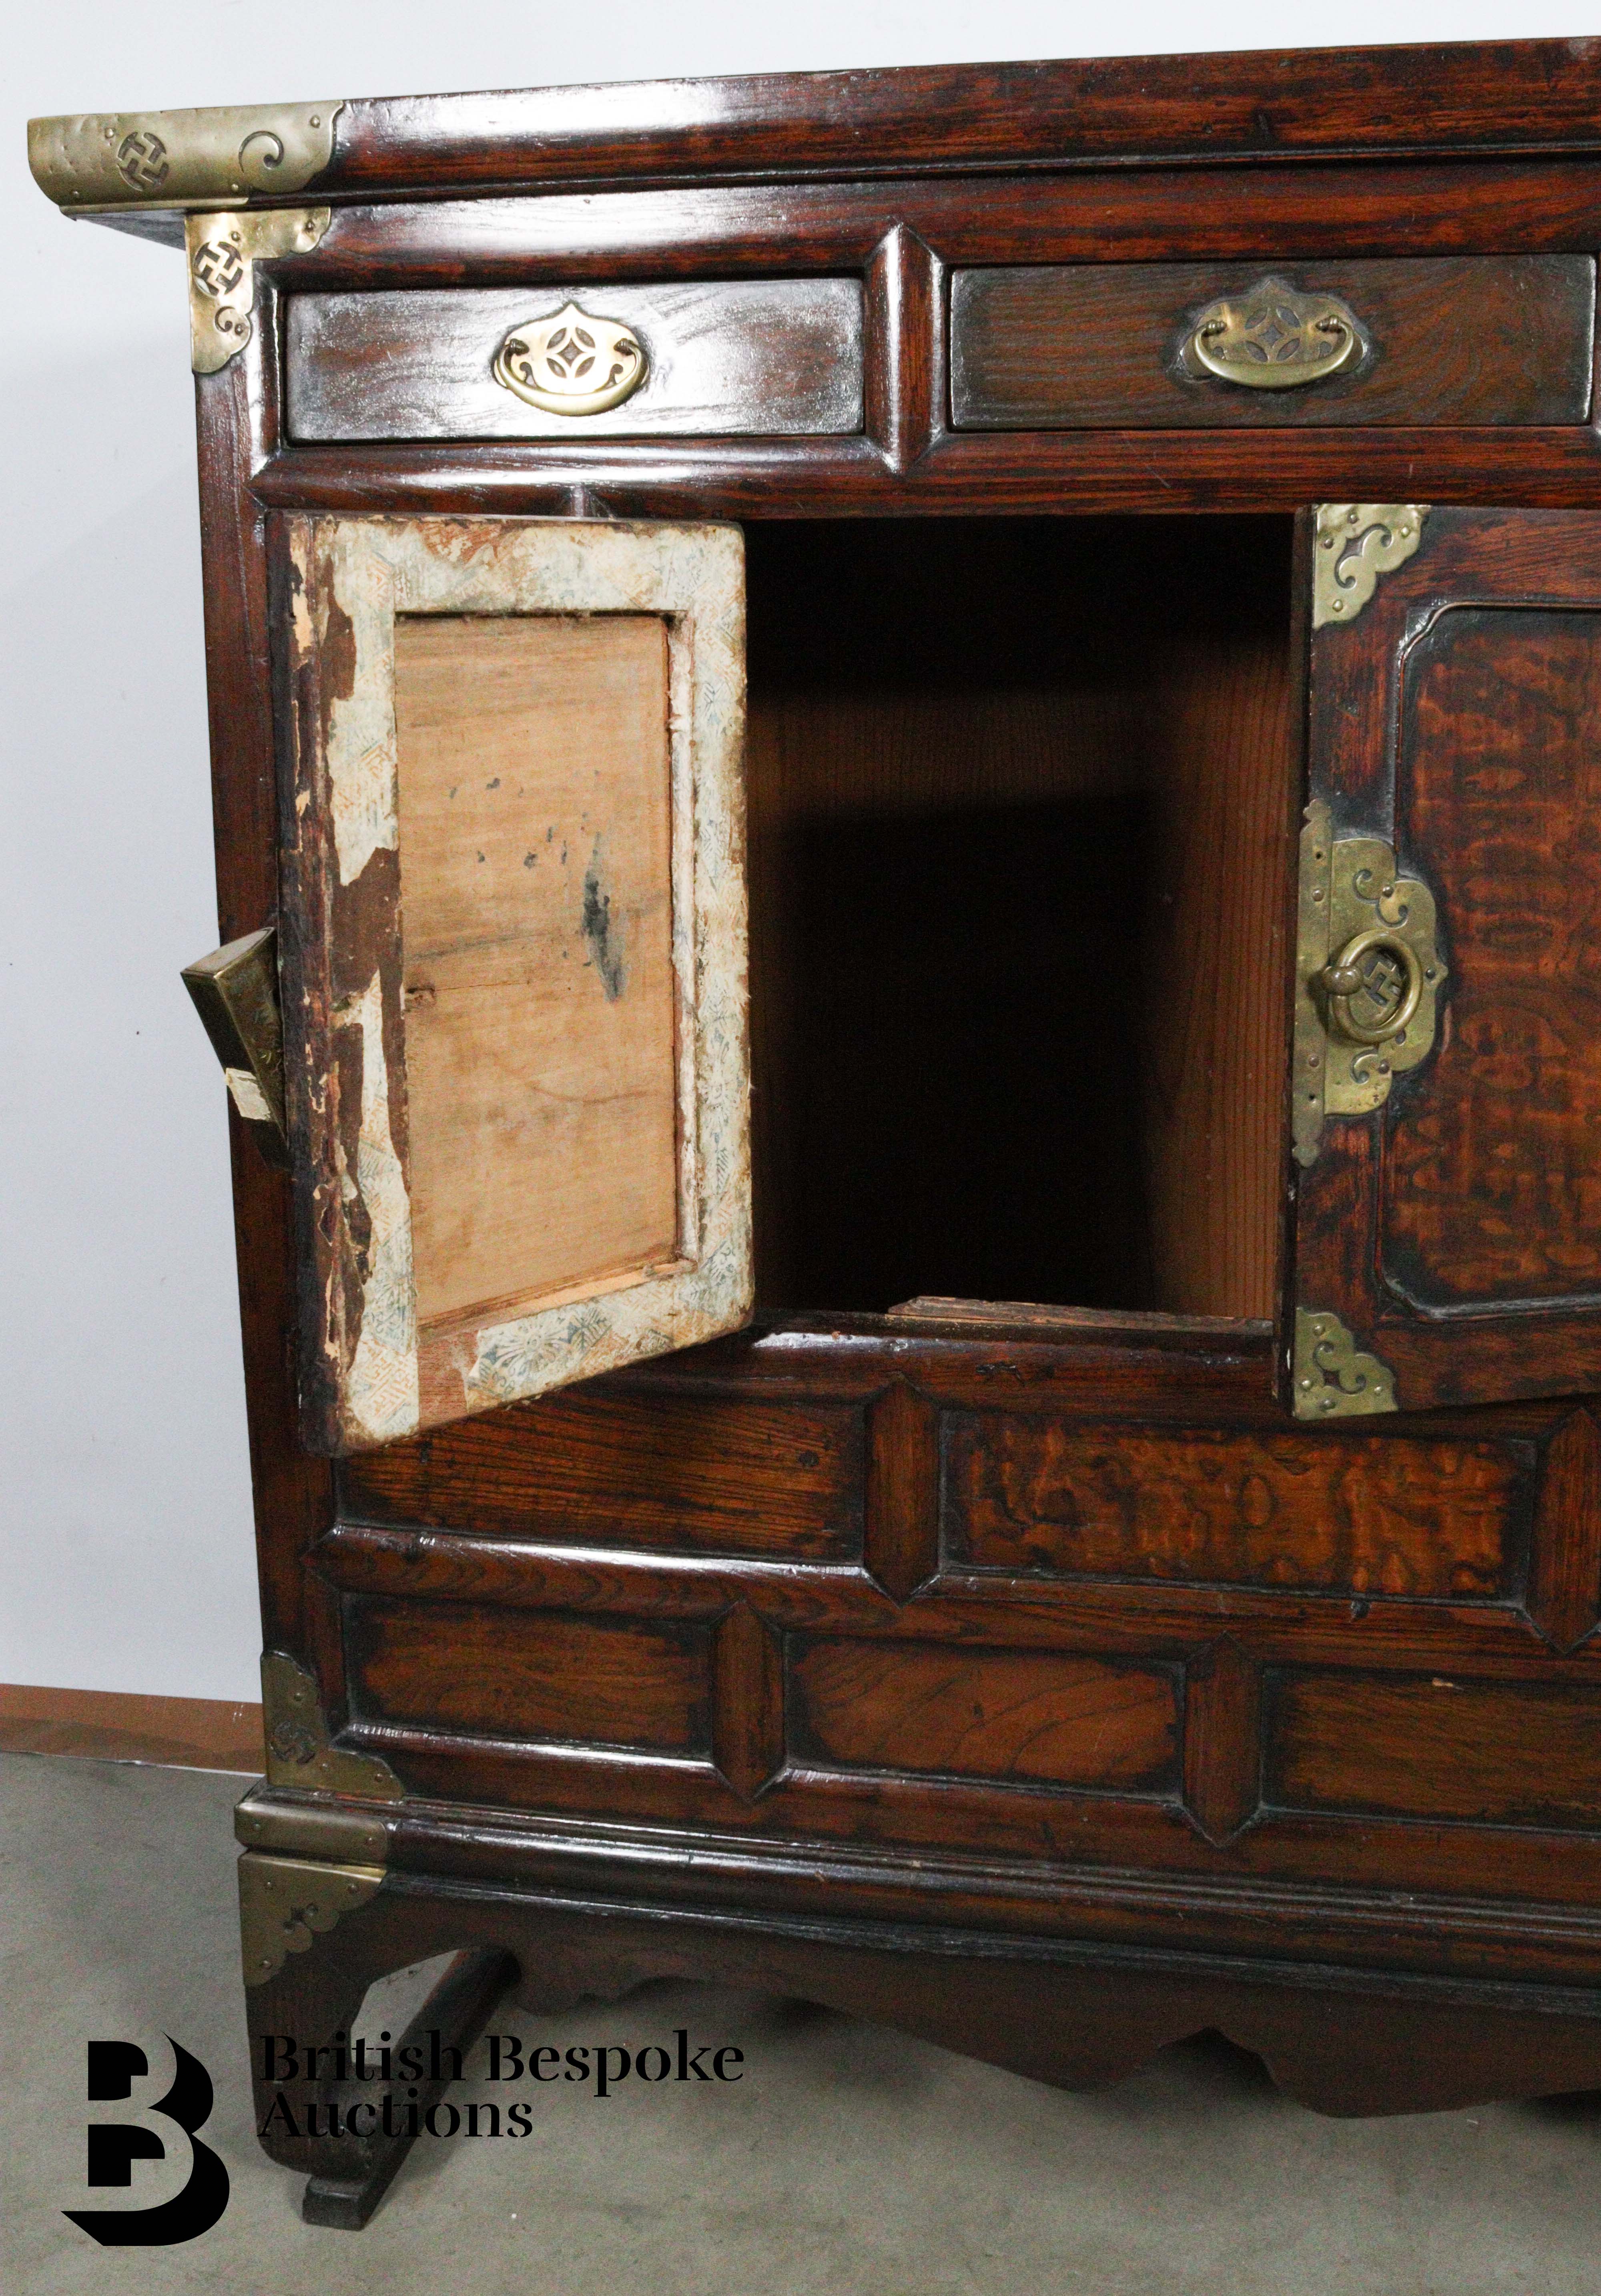 Early 20th Century Korean Cabinet - Image 4 of 8